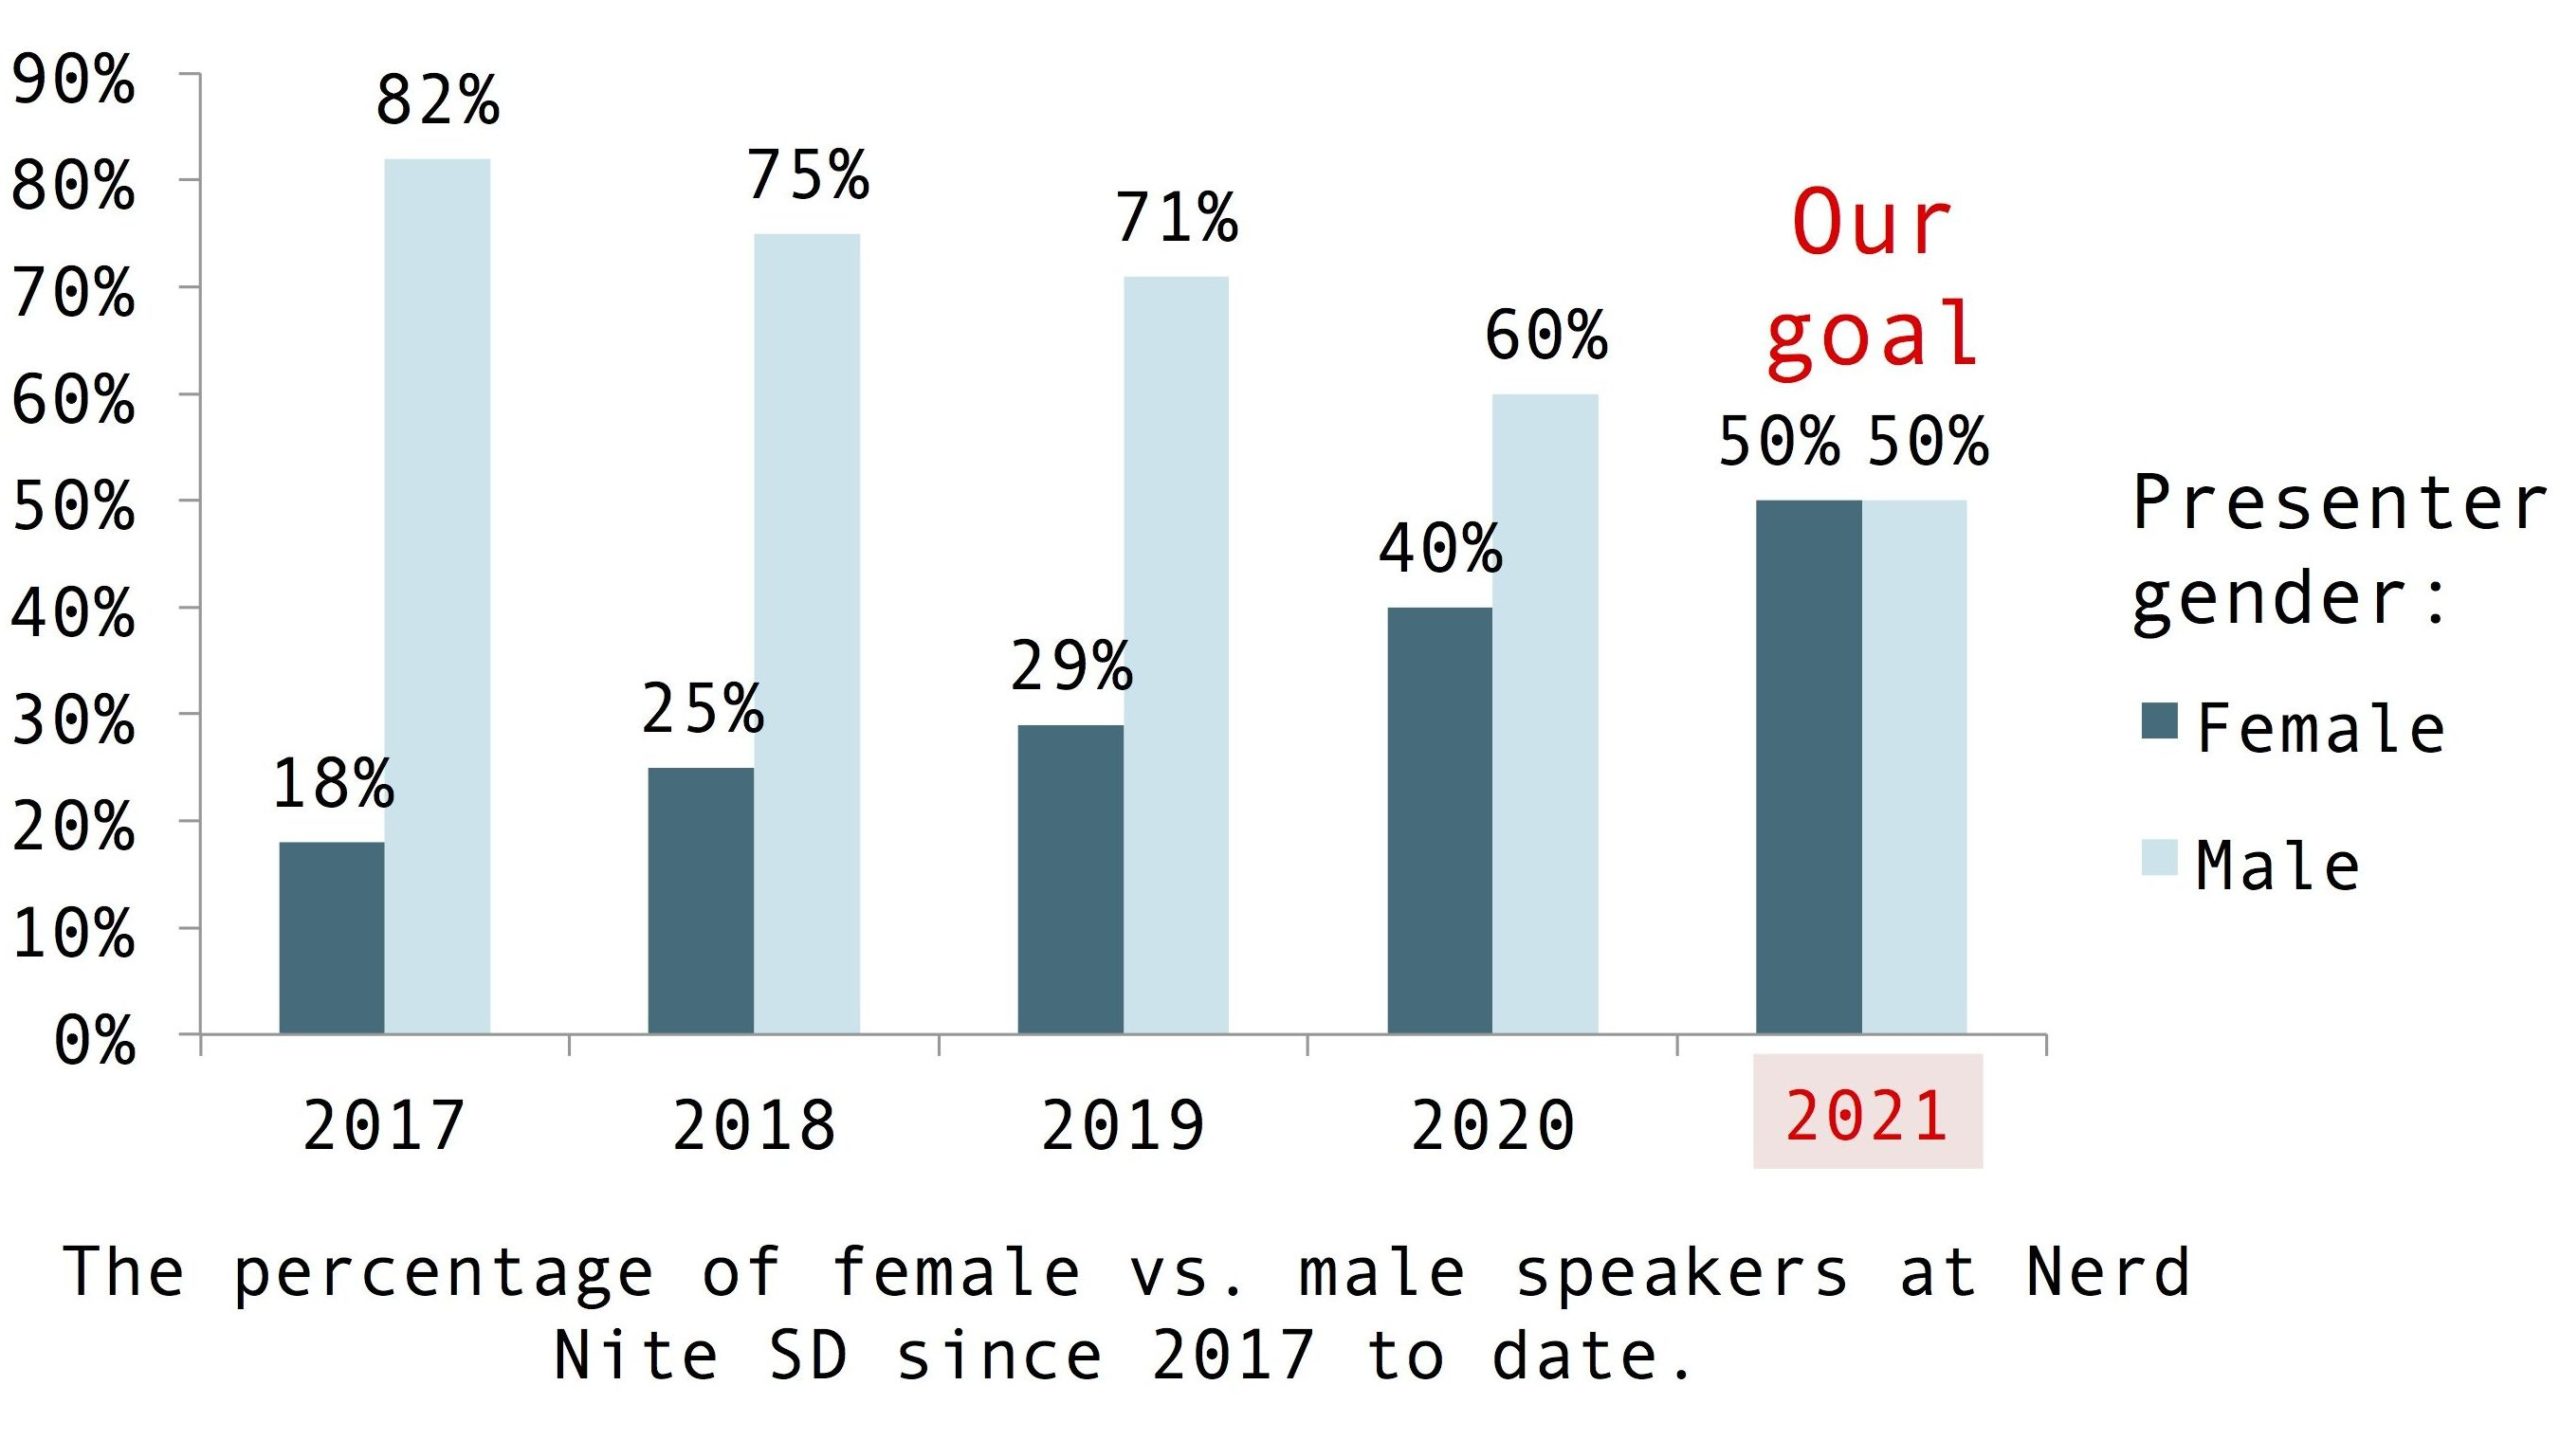 The bar chart shows the proportion of male and female presenter on Nerd Nite San Diego in percentages. Dark blue bars represent the percentage of female presenters and light blue bars represent the perfentage of male pesenters. In 2017, there were 18% female and 82% male presenters, in 2018 there were 25% female and 75% male, in 2019 there were 29% female and 71% male, in 2020 40% female and 60% male. In 2021, the projected ratio is 50-50%.